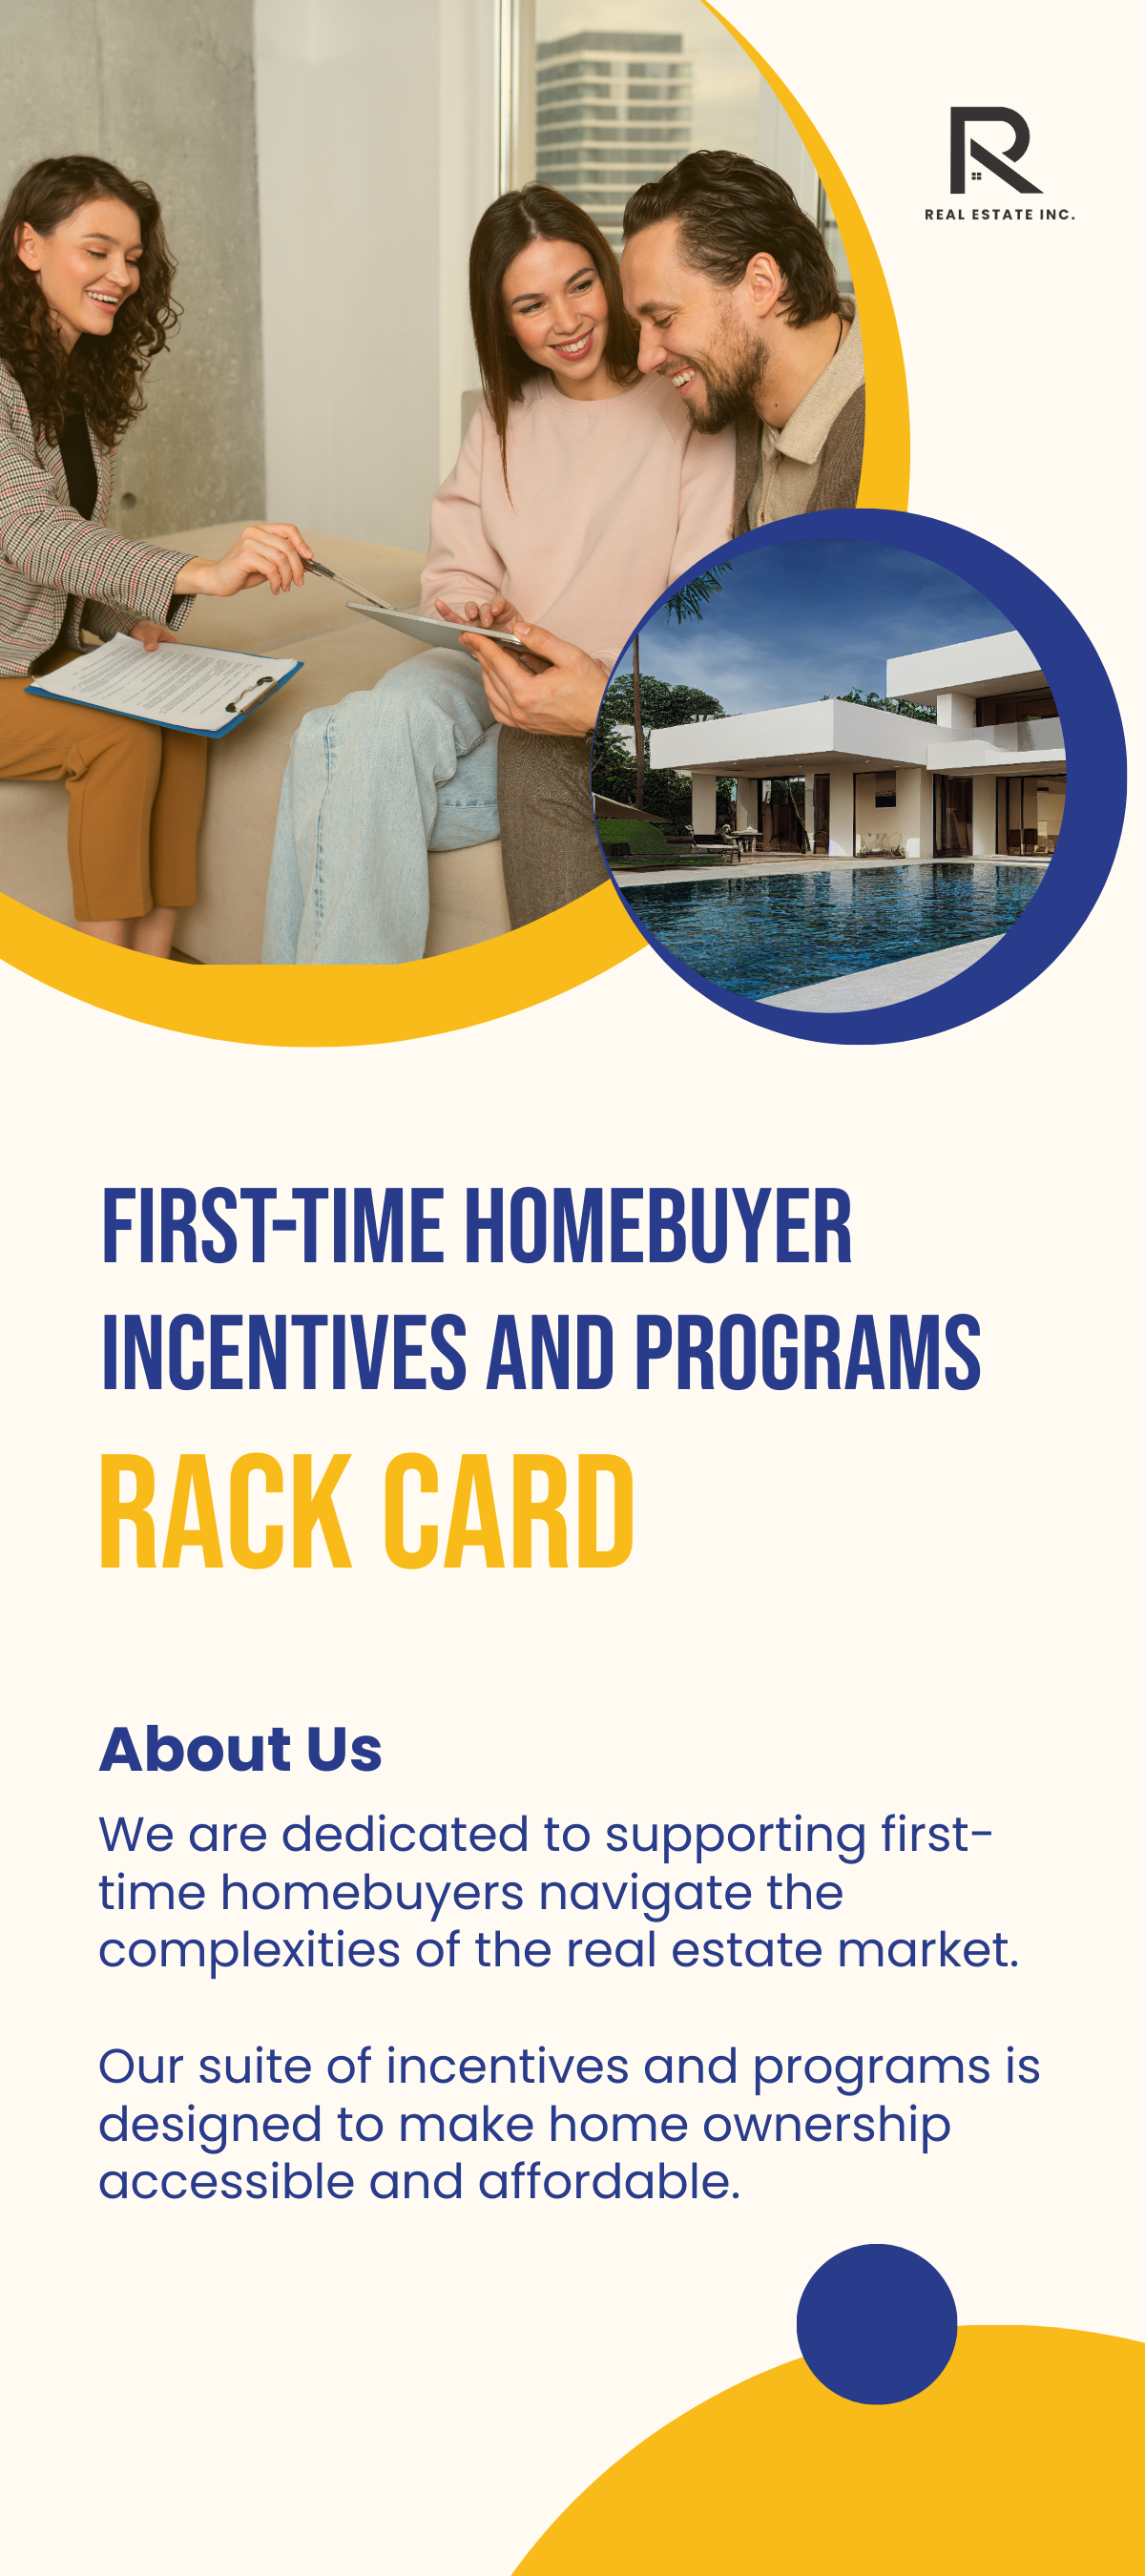 First-Time Homebuyer Incentives and Programs Rack Card